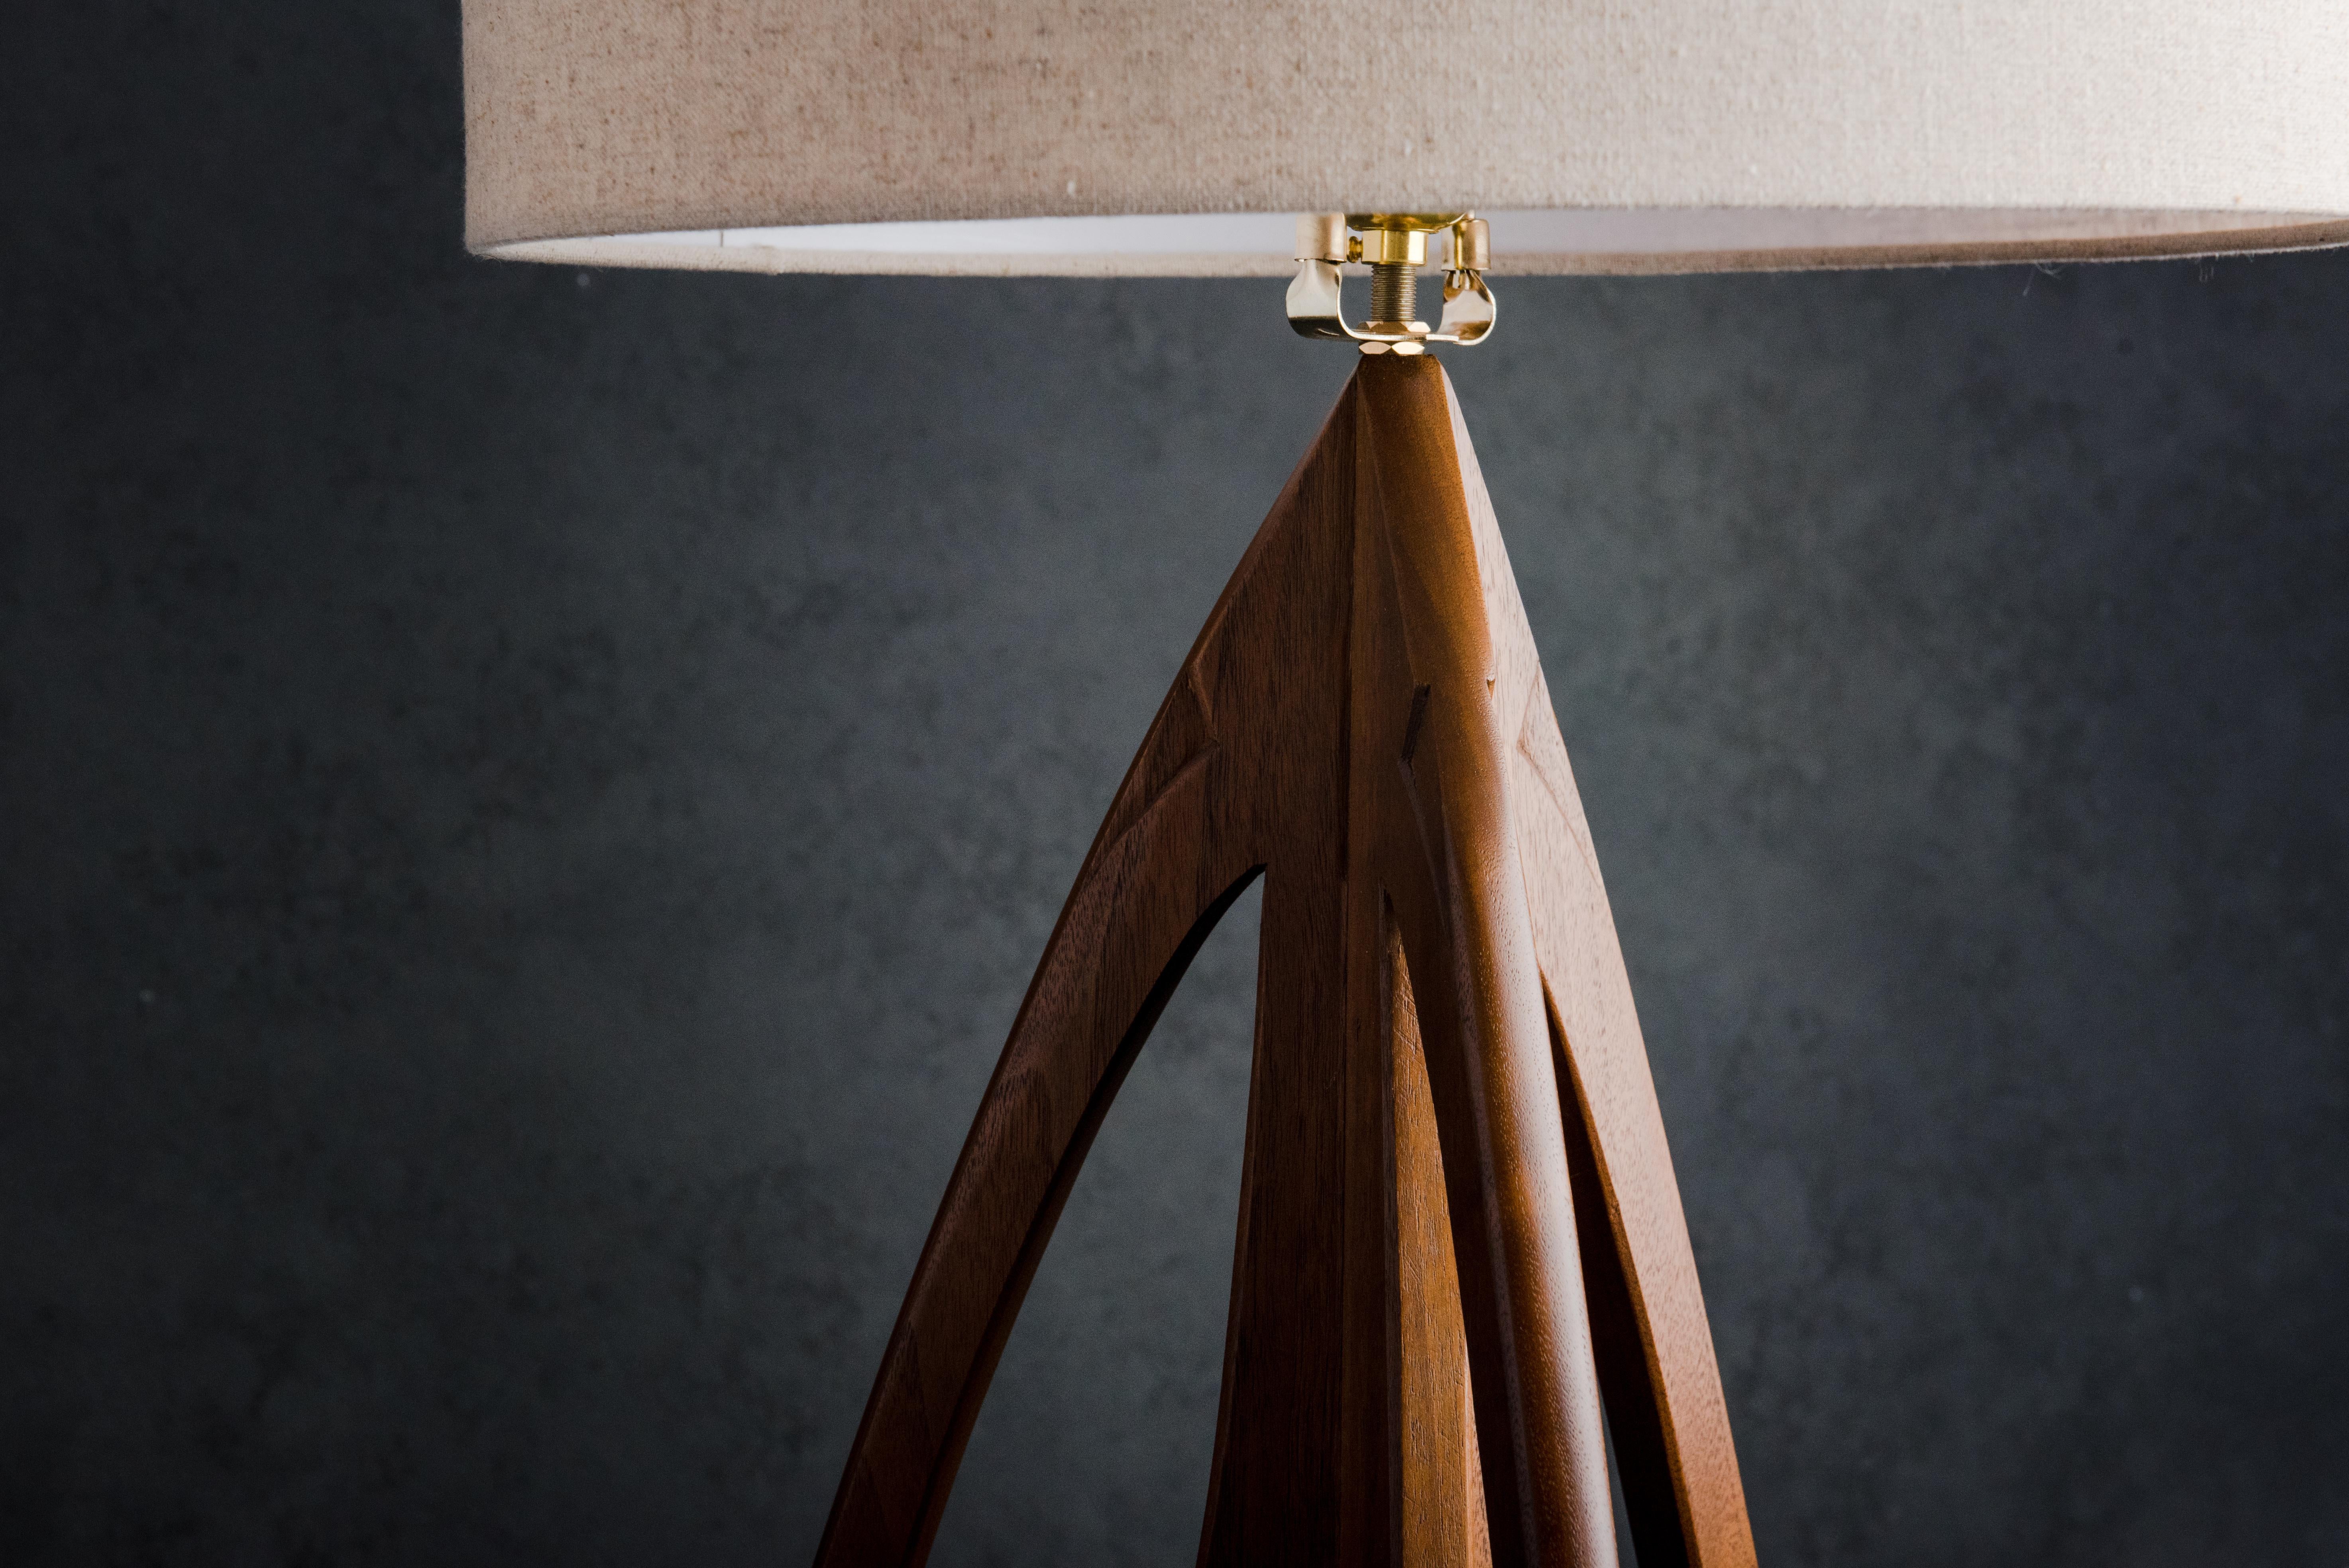 The base is formed by three parts lifting from the floor and coming together, accented by hand shaping to create a sculpture that happens to light up a room. The cord is discreetly hidden down the edge of a leg. 

The lamp (not including the shade)